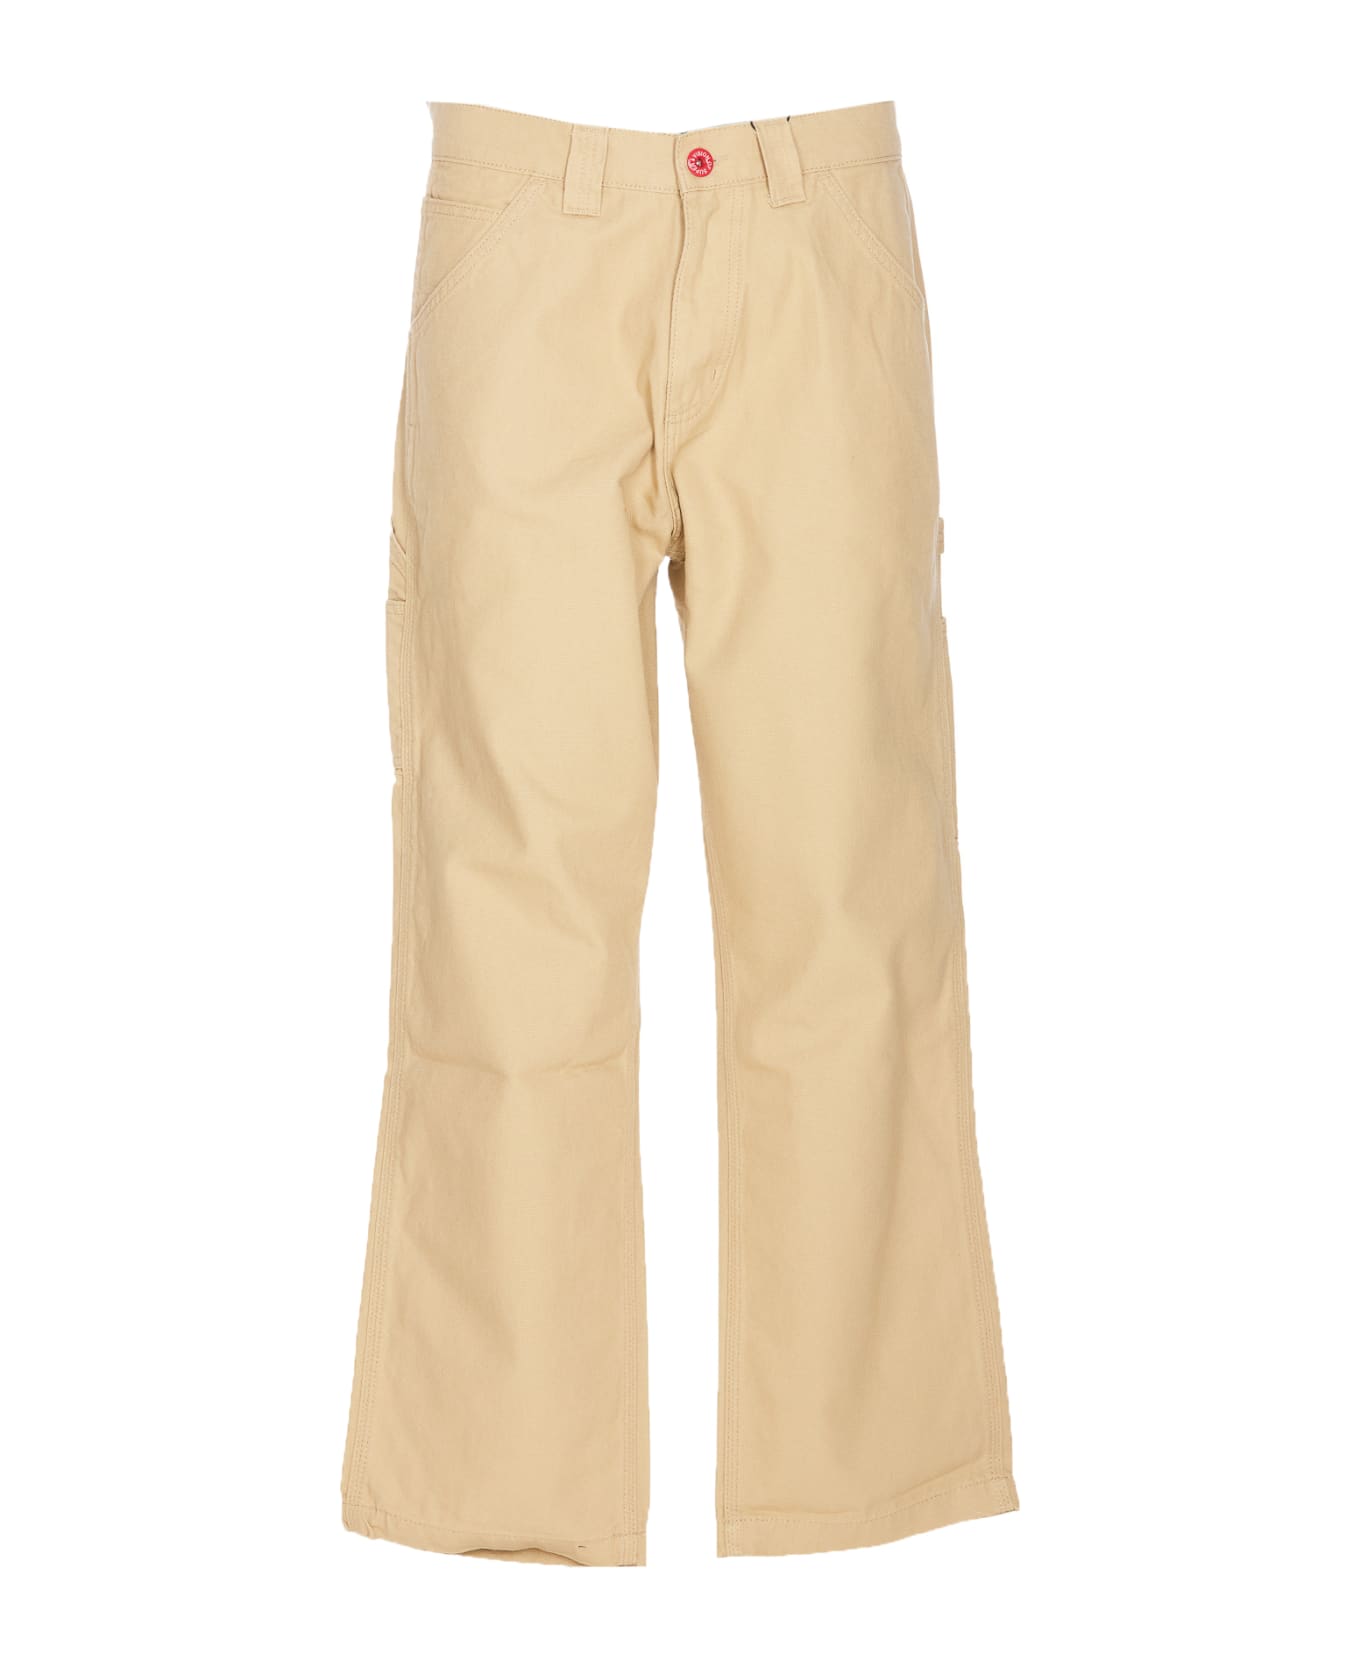 Vision of Super Sand Worker Pants With V-s Gothic Patches - Beige